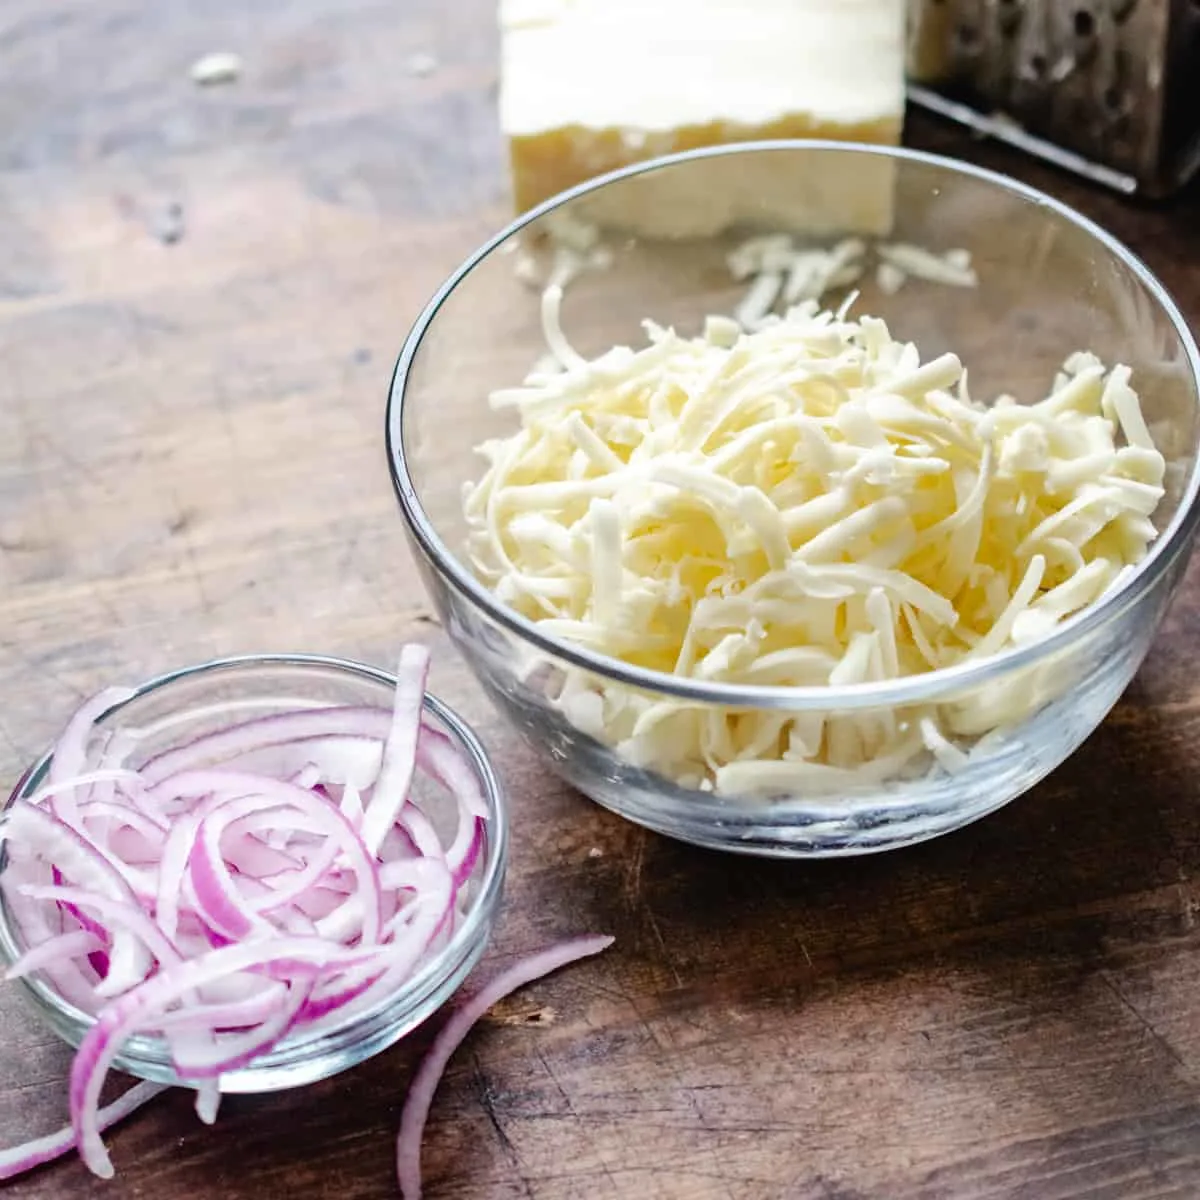 Sliced red onions and shredded cheese in bowls.